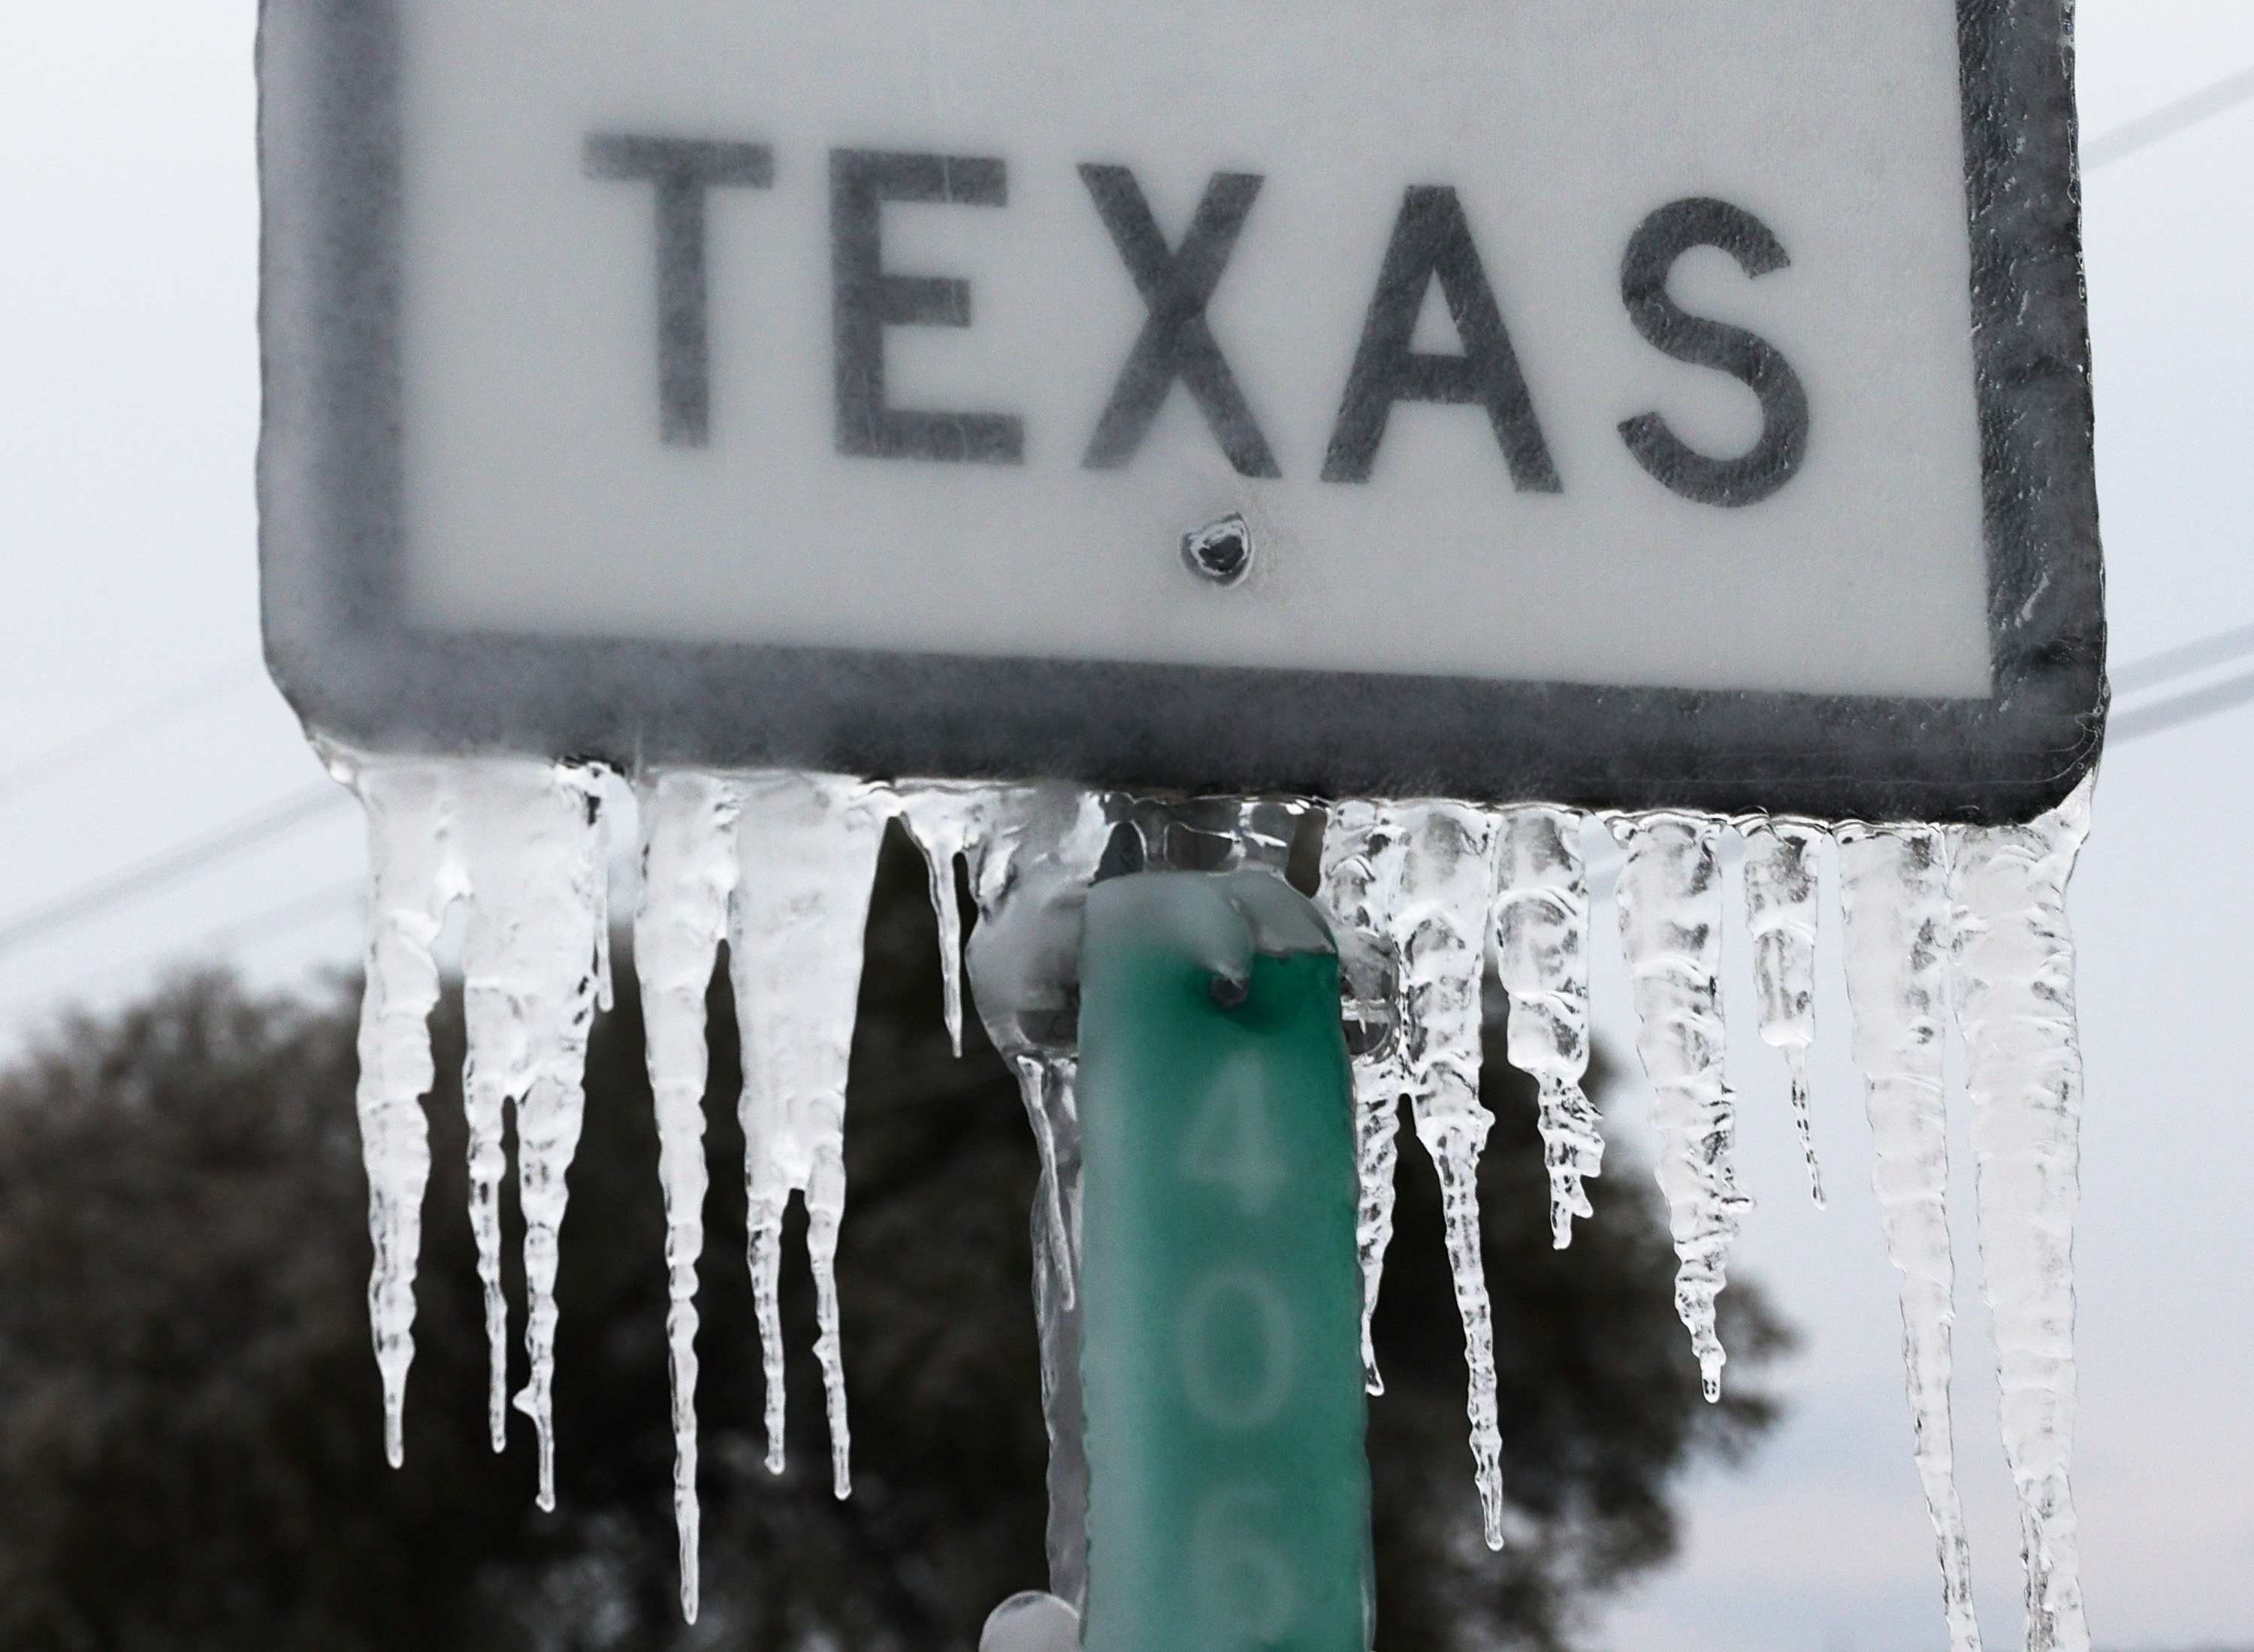 Icicles hang off the State Highway 195 sign on February 18, 2021 in Killeen, Texas. Winter storm Uri has brought historic cold weather and power outages to Texas as storms have swept across 26 states with a mix of freezing temperatures and precipitation. (Photo by Joe Raedle/Getty Images)